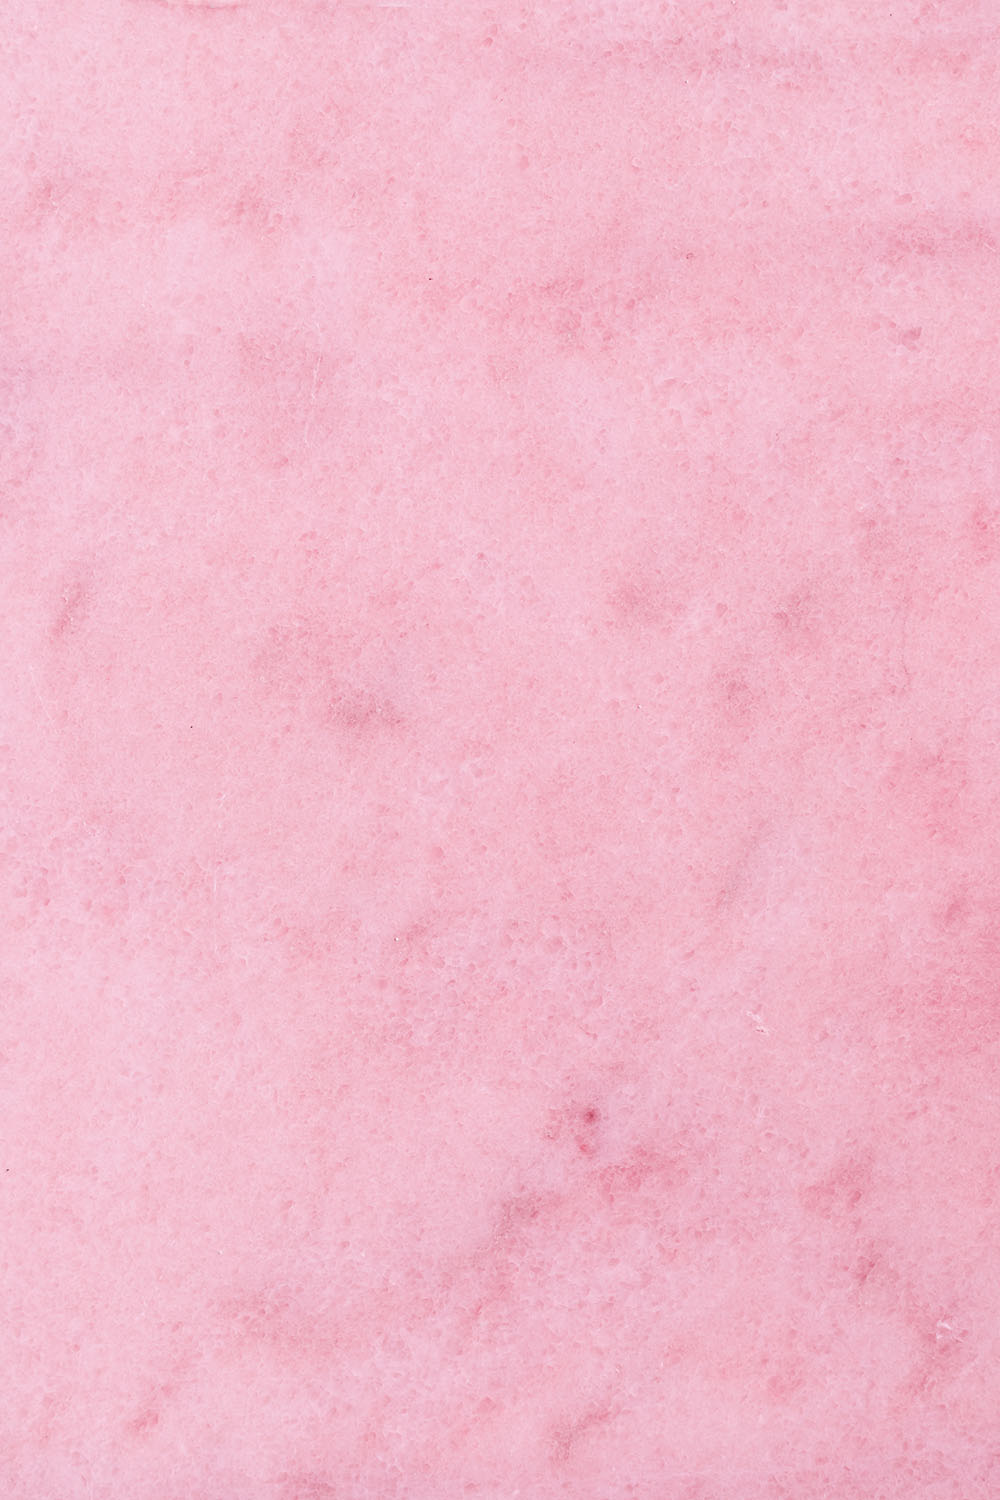 Backdrop ‘lollypop pink’ with soft texture, ideal for food photography